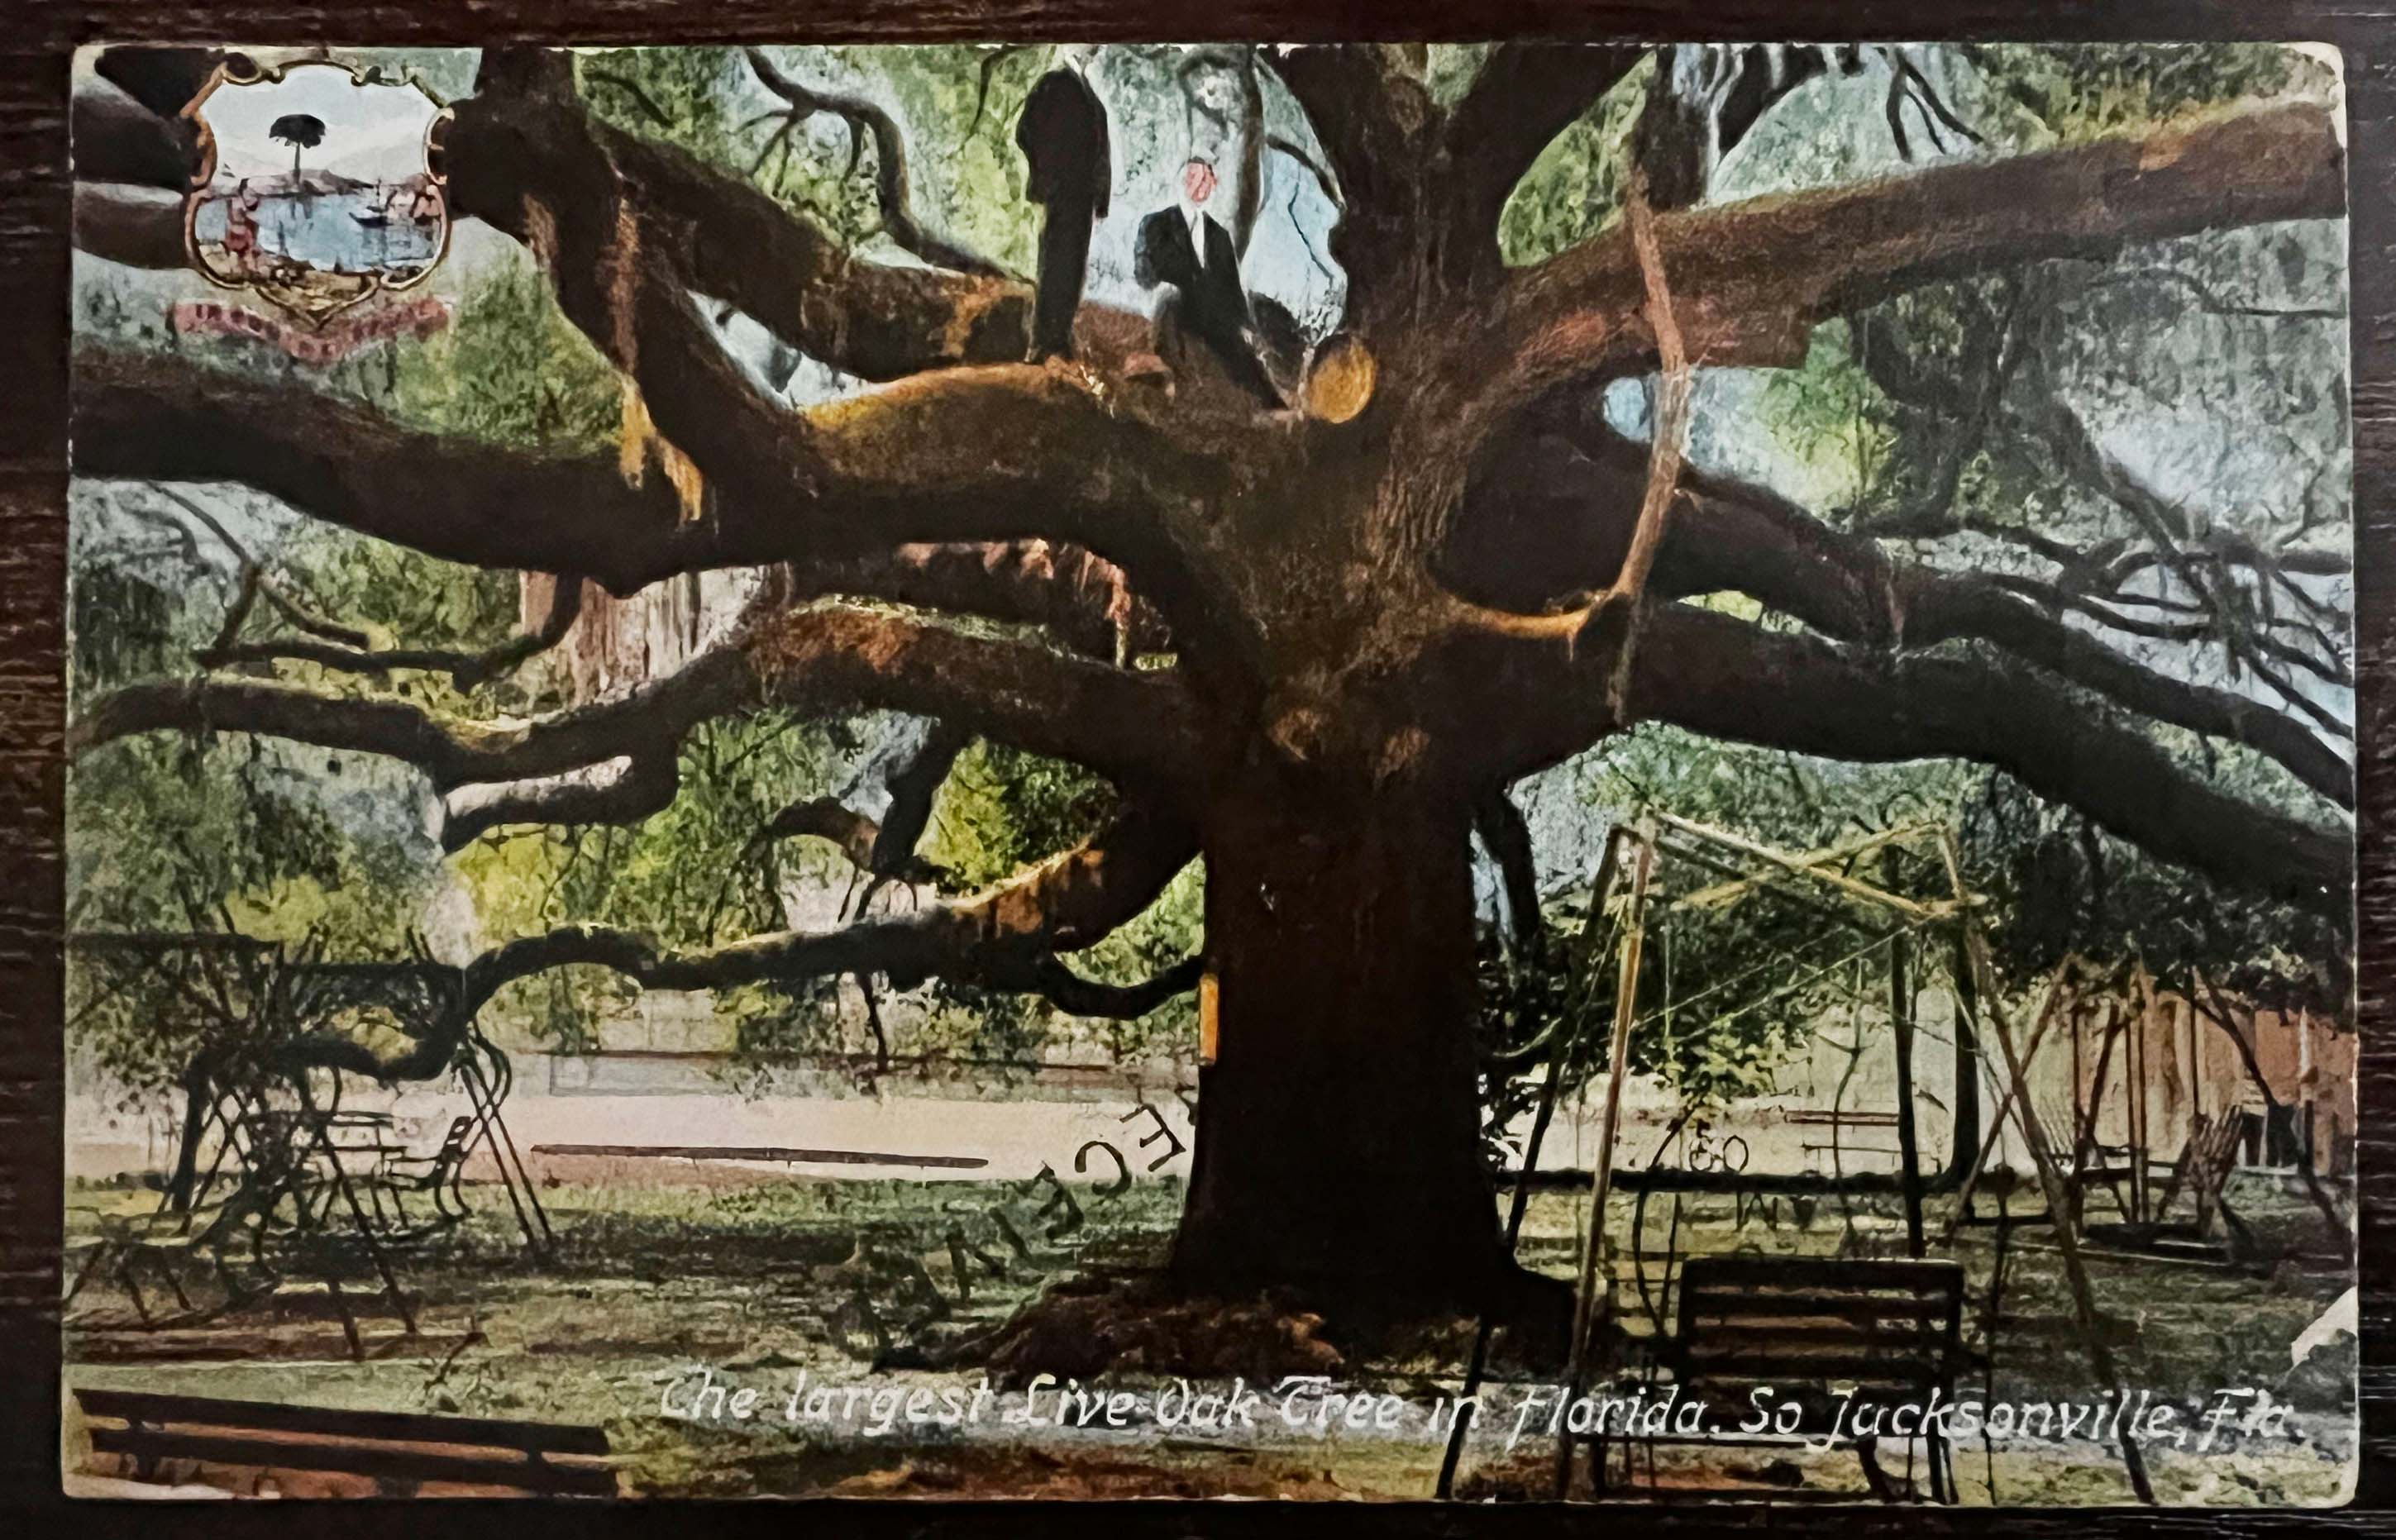 The postcard with the image of the treaty oak 